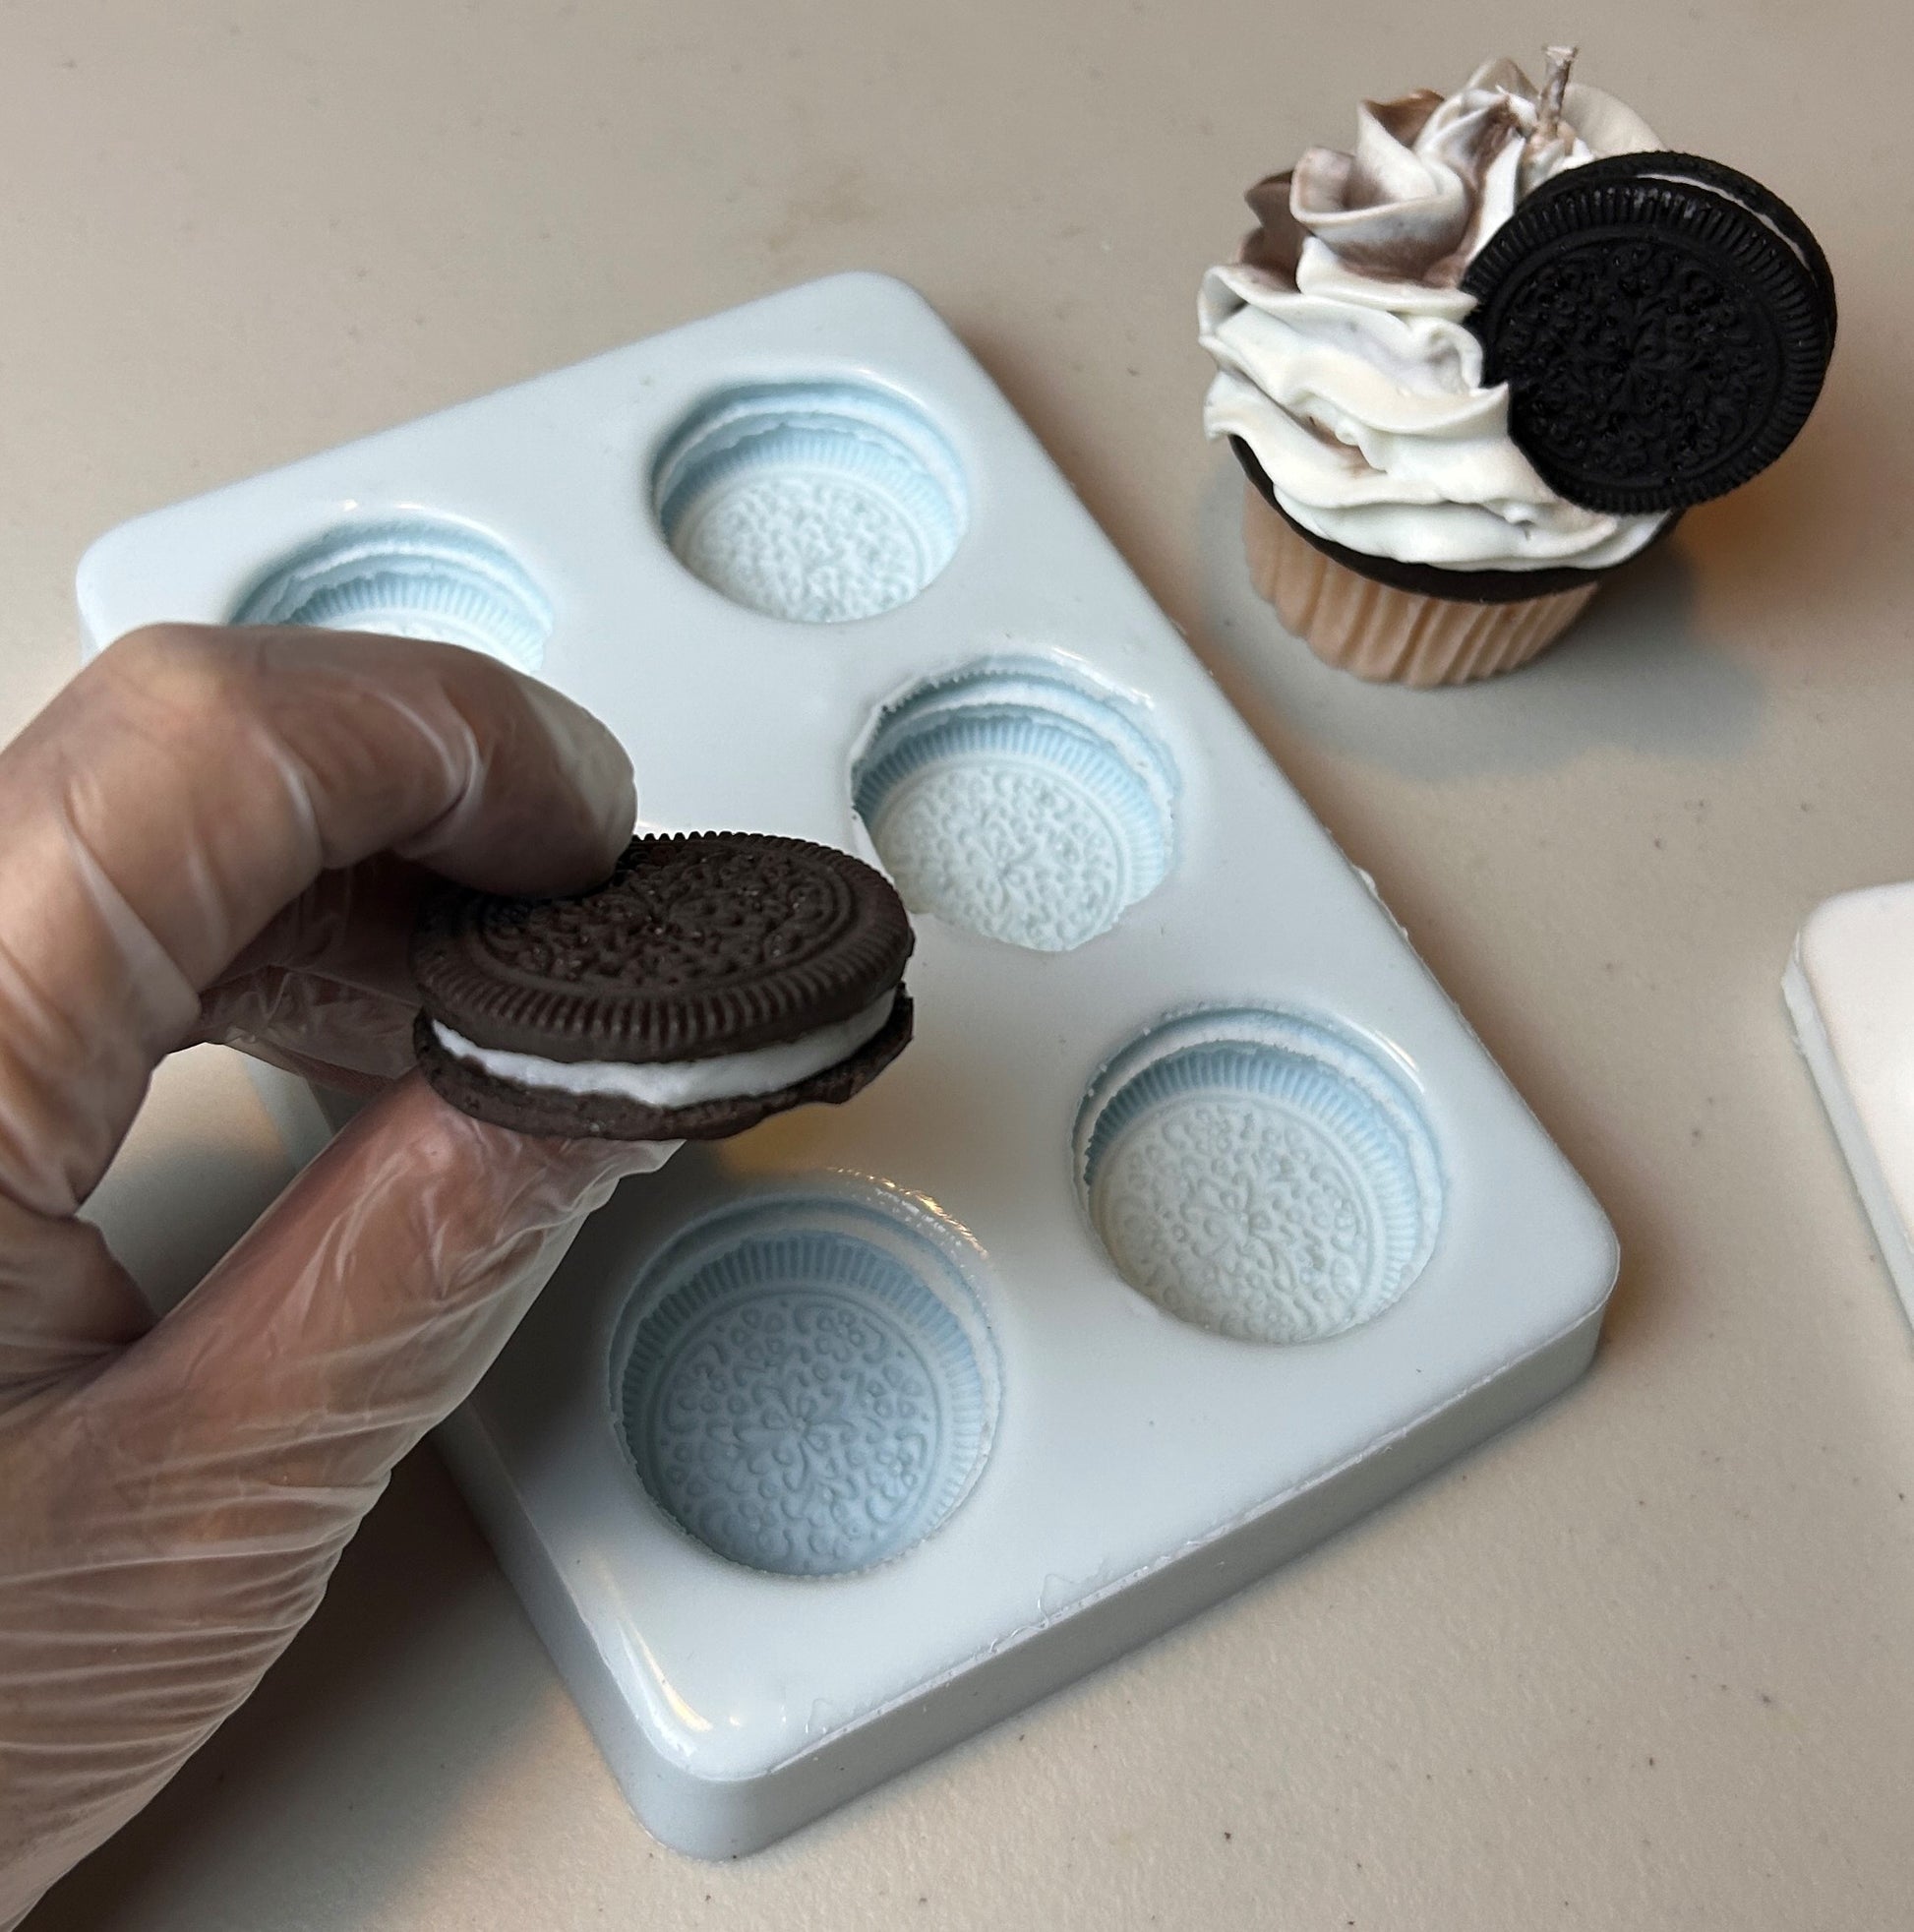 How to Make an Oreo Cookie Mold - Craft Klatch